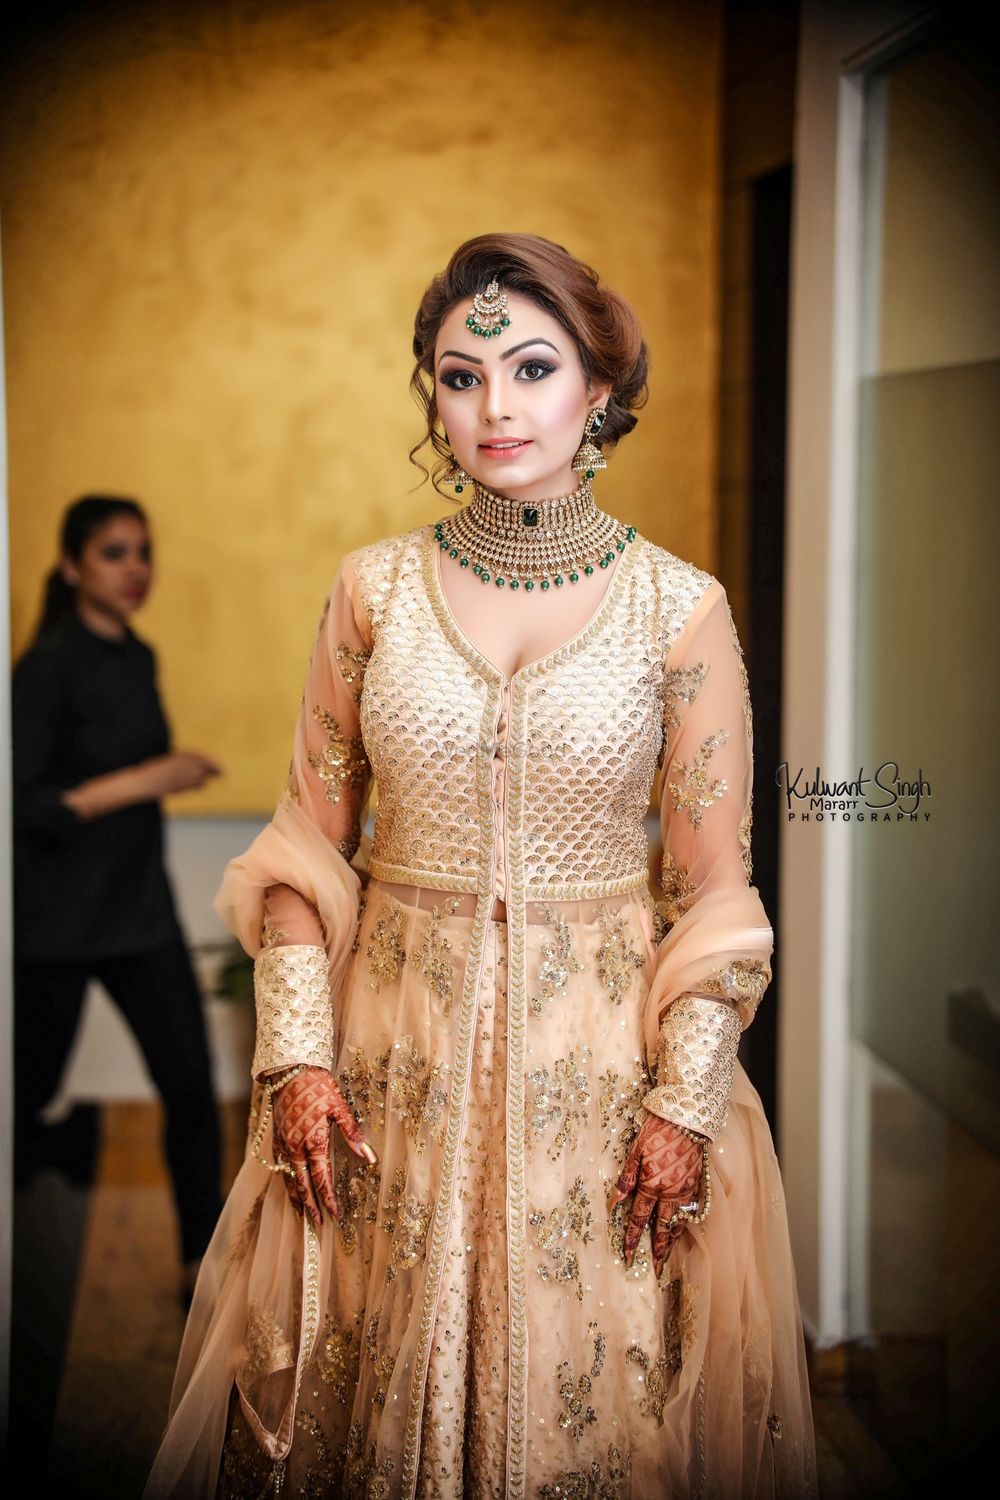 Photo From Bridals - By Headmasters Ludhiana Salon and Spa